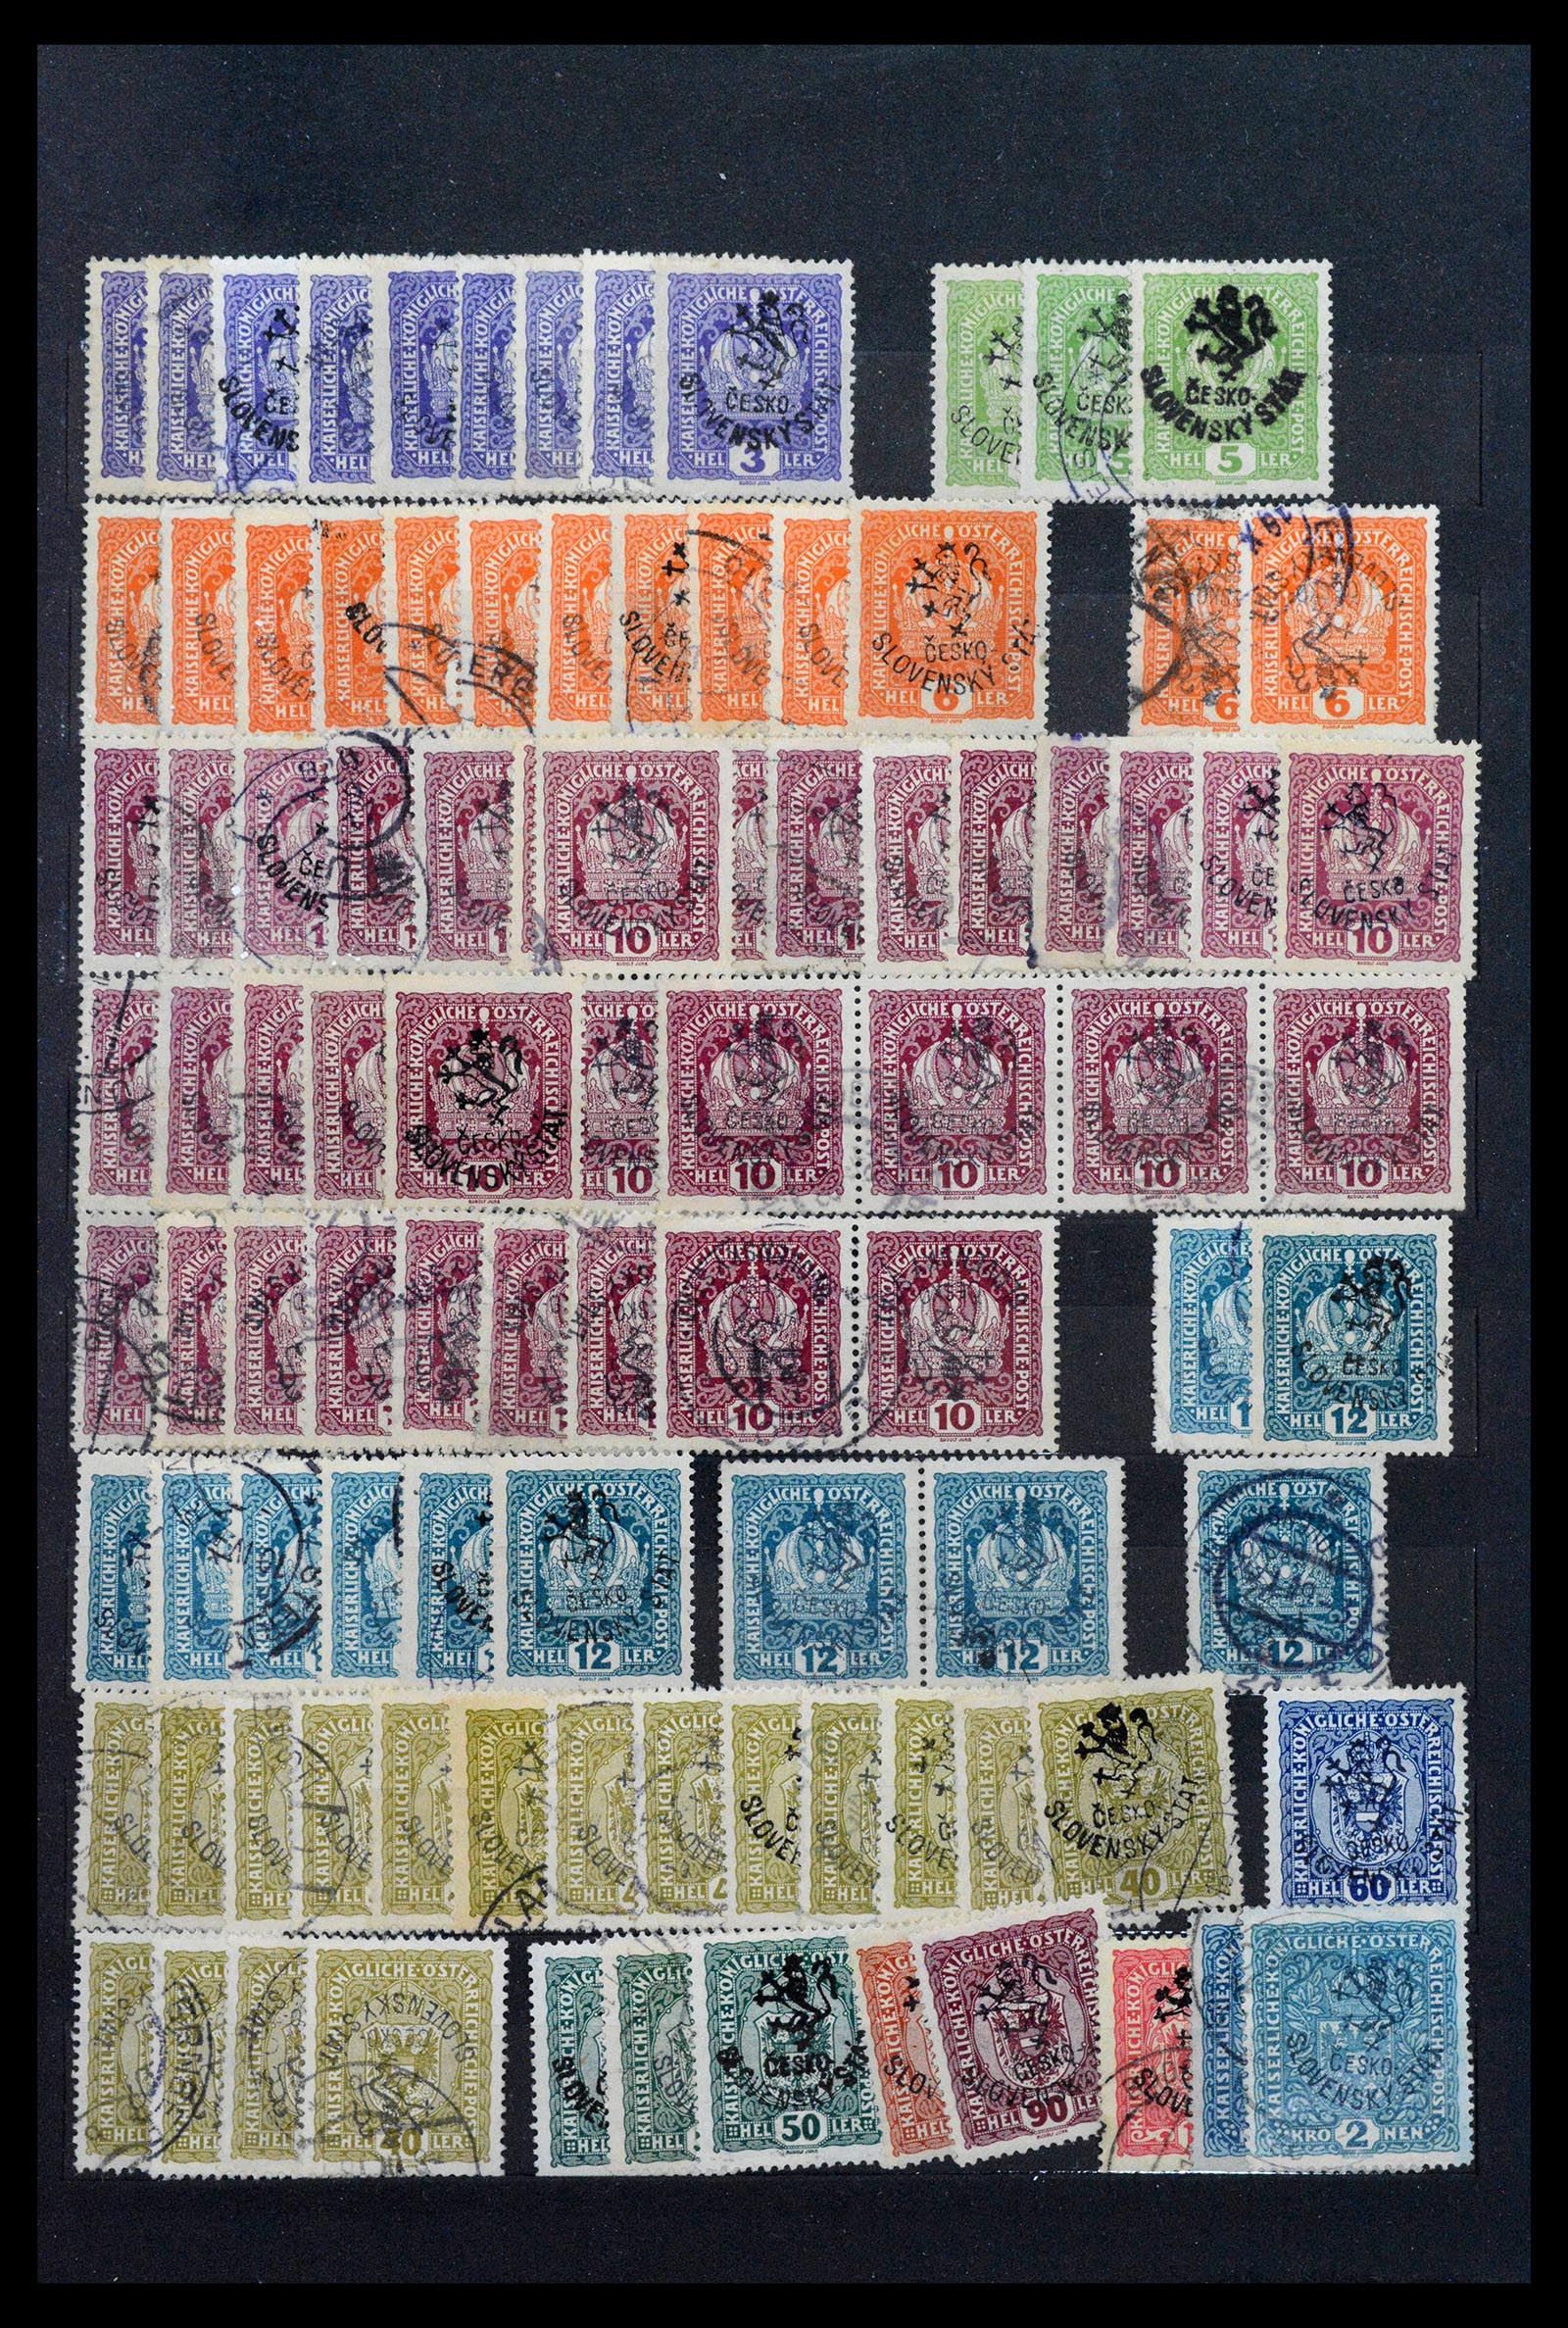 39165 0001 - Stamp collection 39165 Czechoslovakia specialised 1919-1970.